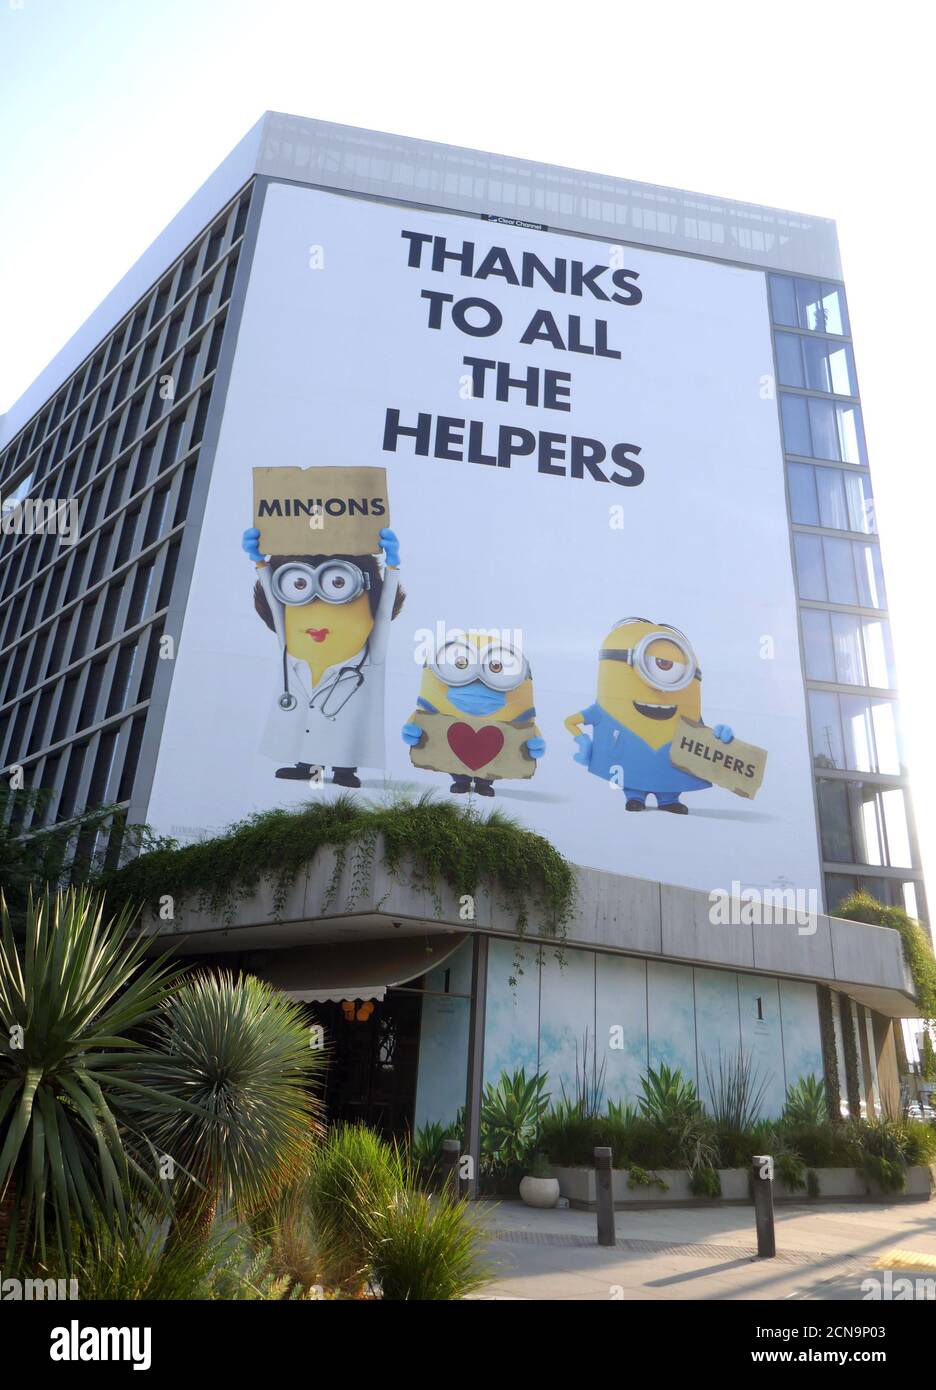 West Hollywood, California, USA 17th September 2020 A general view of atmosphere of Minions Ad at 1 Hotel West Hollywood on Sunset Blvd on September 17, 2020 during the Coronavirus Covid-19 Pandemic in West Hollywood, California, USA. Photo by Barry King/Alamy Stock Photo Stock Photo